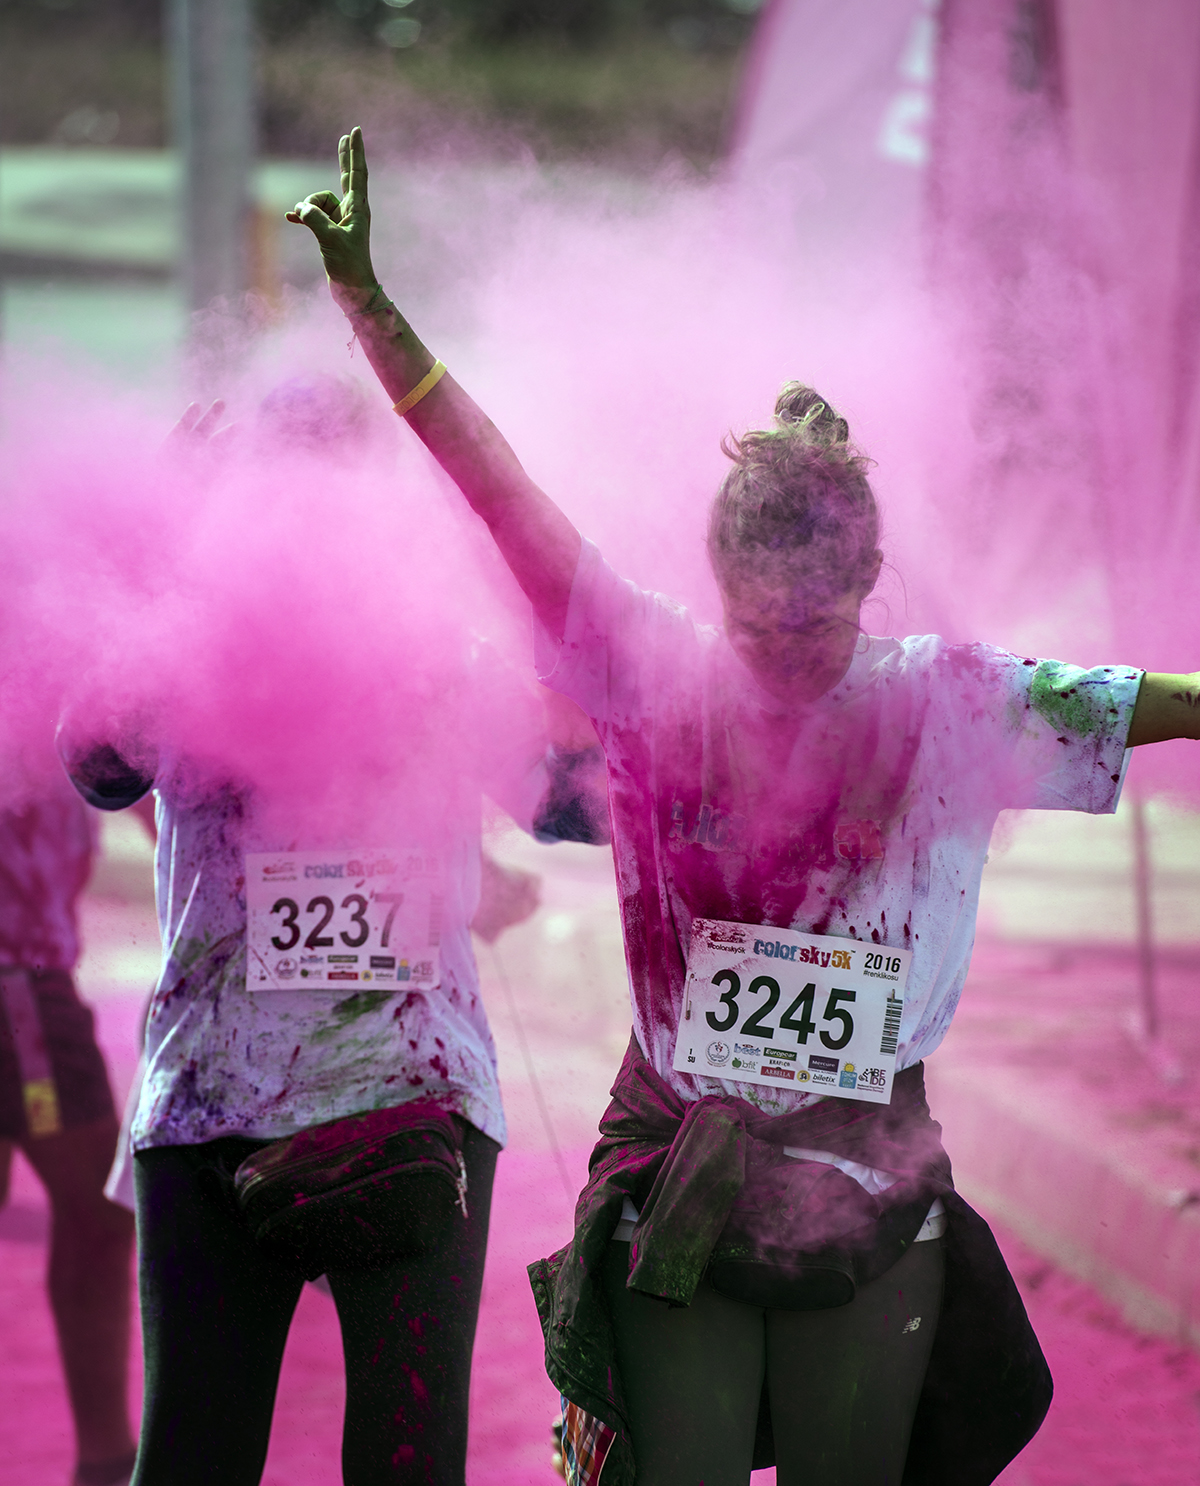 #283 —Caddebostan - 
The Color Sky 5K Rainbow Run Festival is organised with the participation of the Physically Handicapped Support Foundation. 
